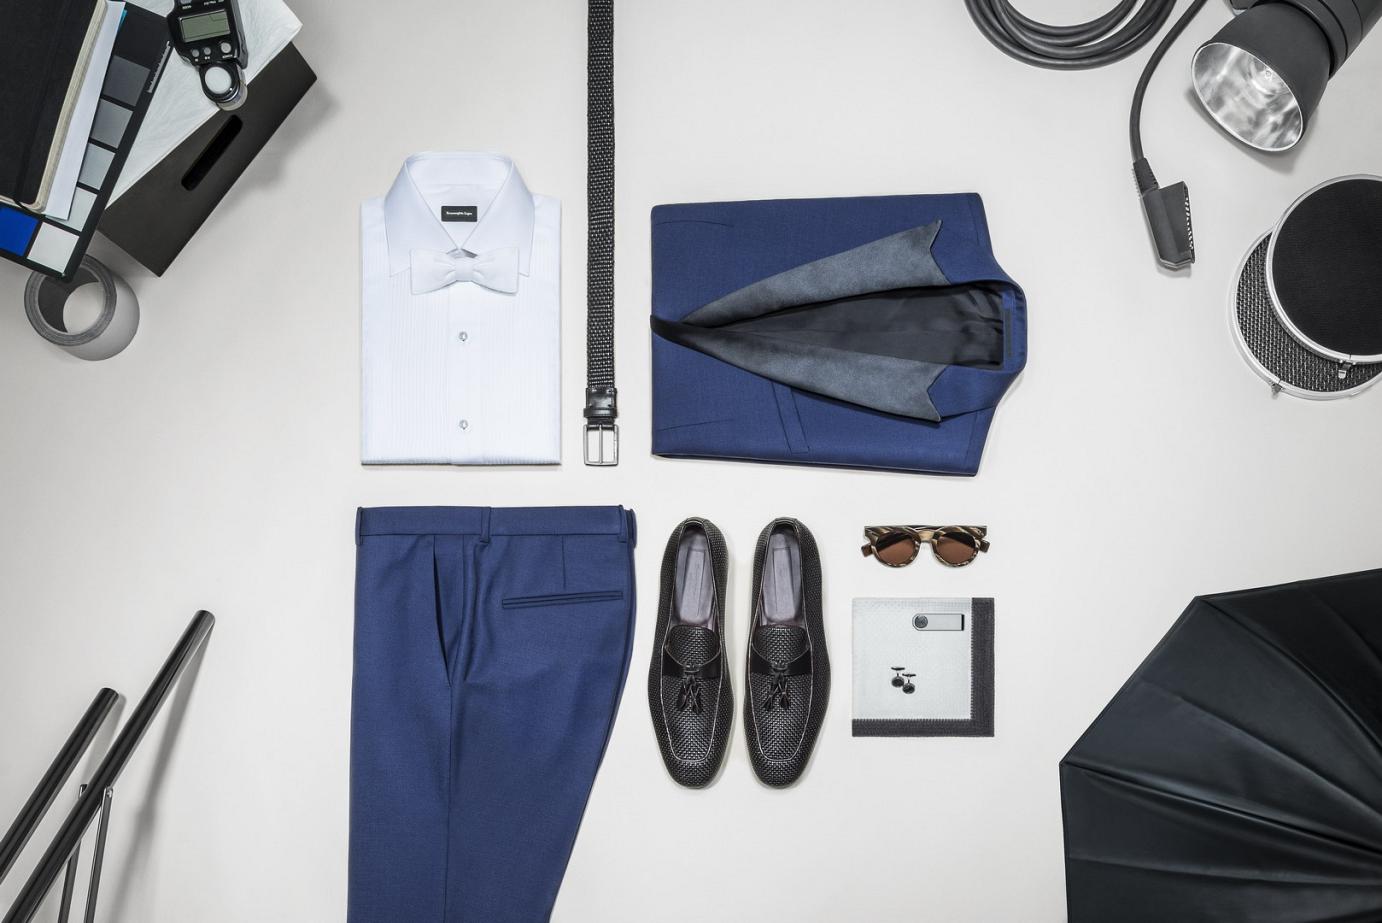 CoqCreative power by ProductionLink s.r.l. Zegna-Accessorizes Zegna-Accessorizes  Zegna-Accessorizes